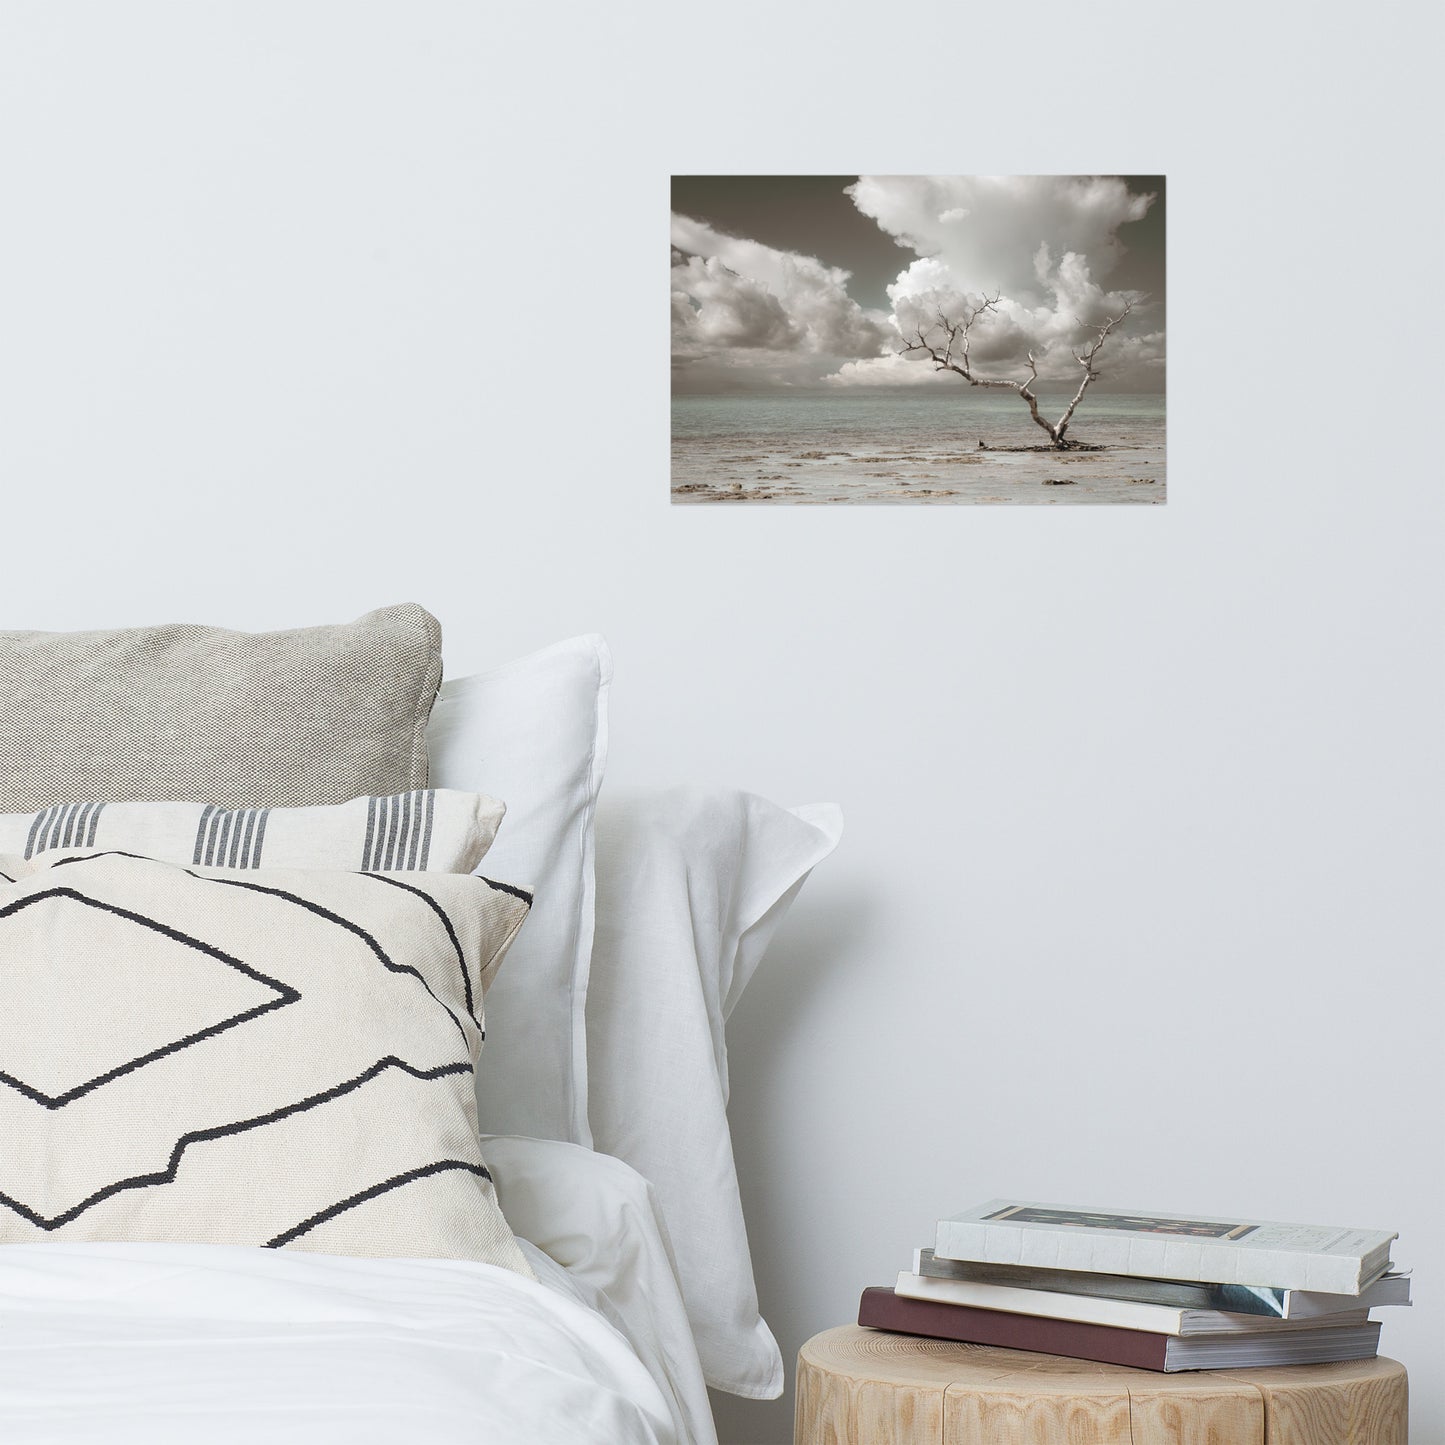 Wanderlust Aged and Colorized Coastal Landscape Photo Paper Poster